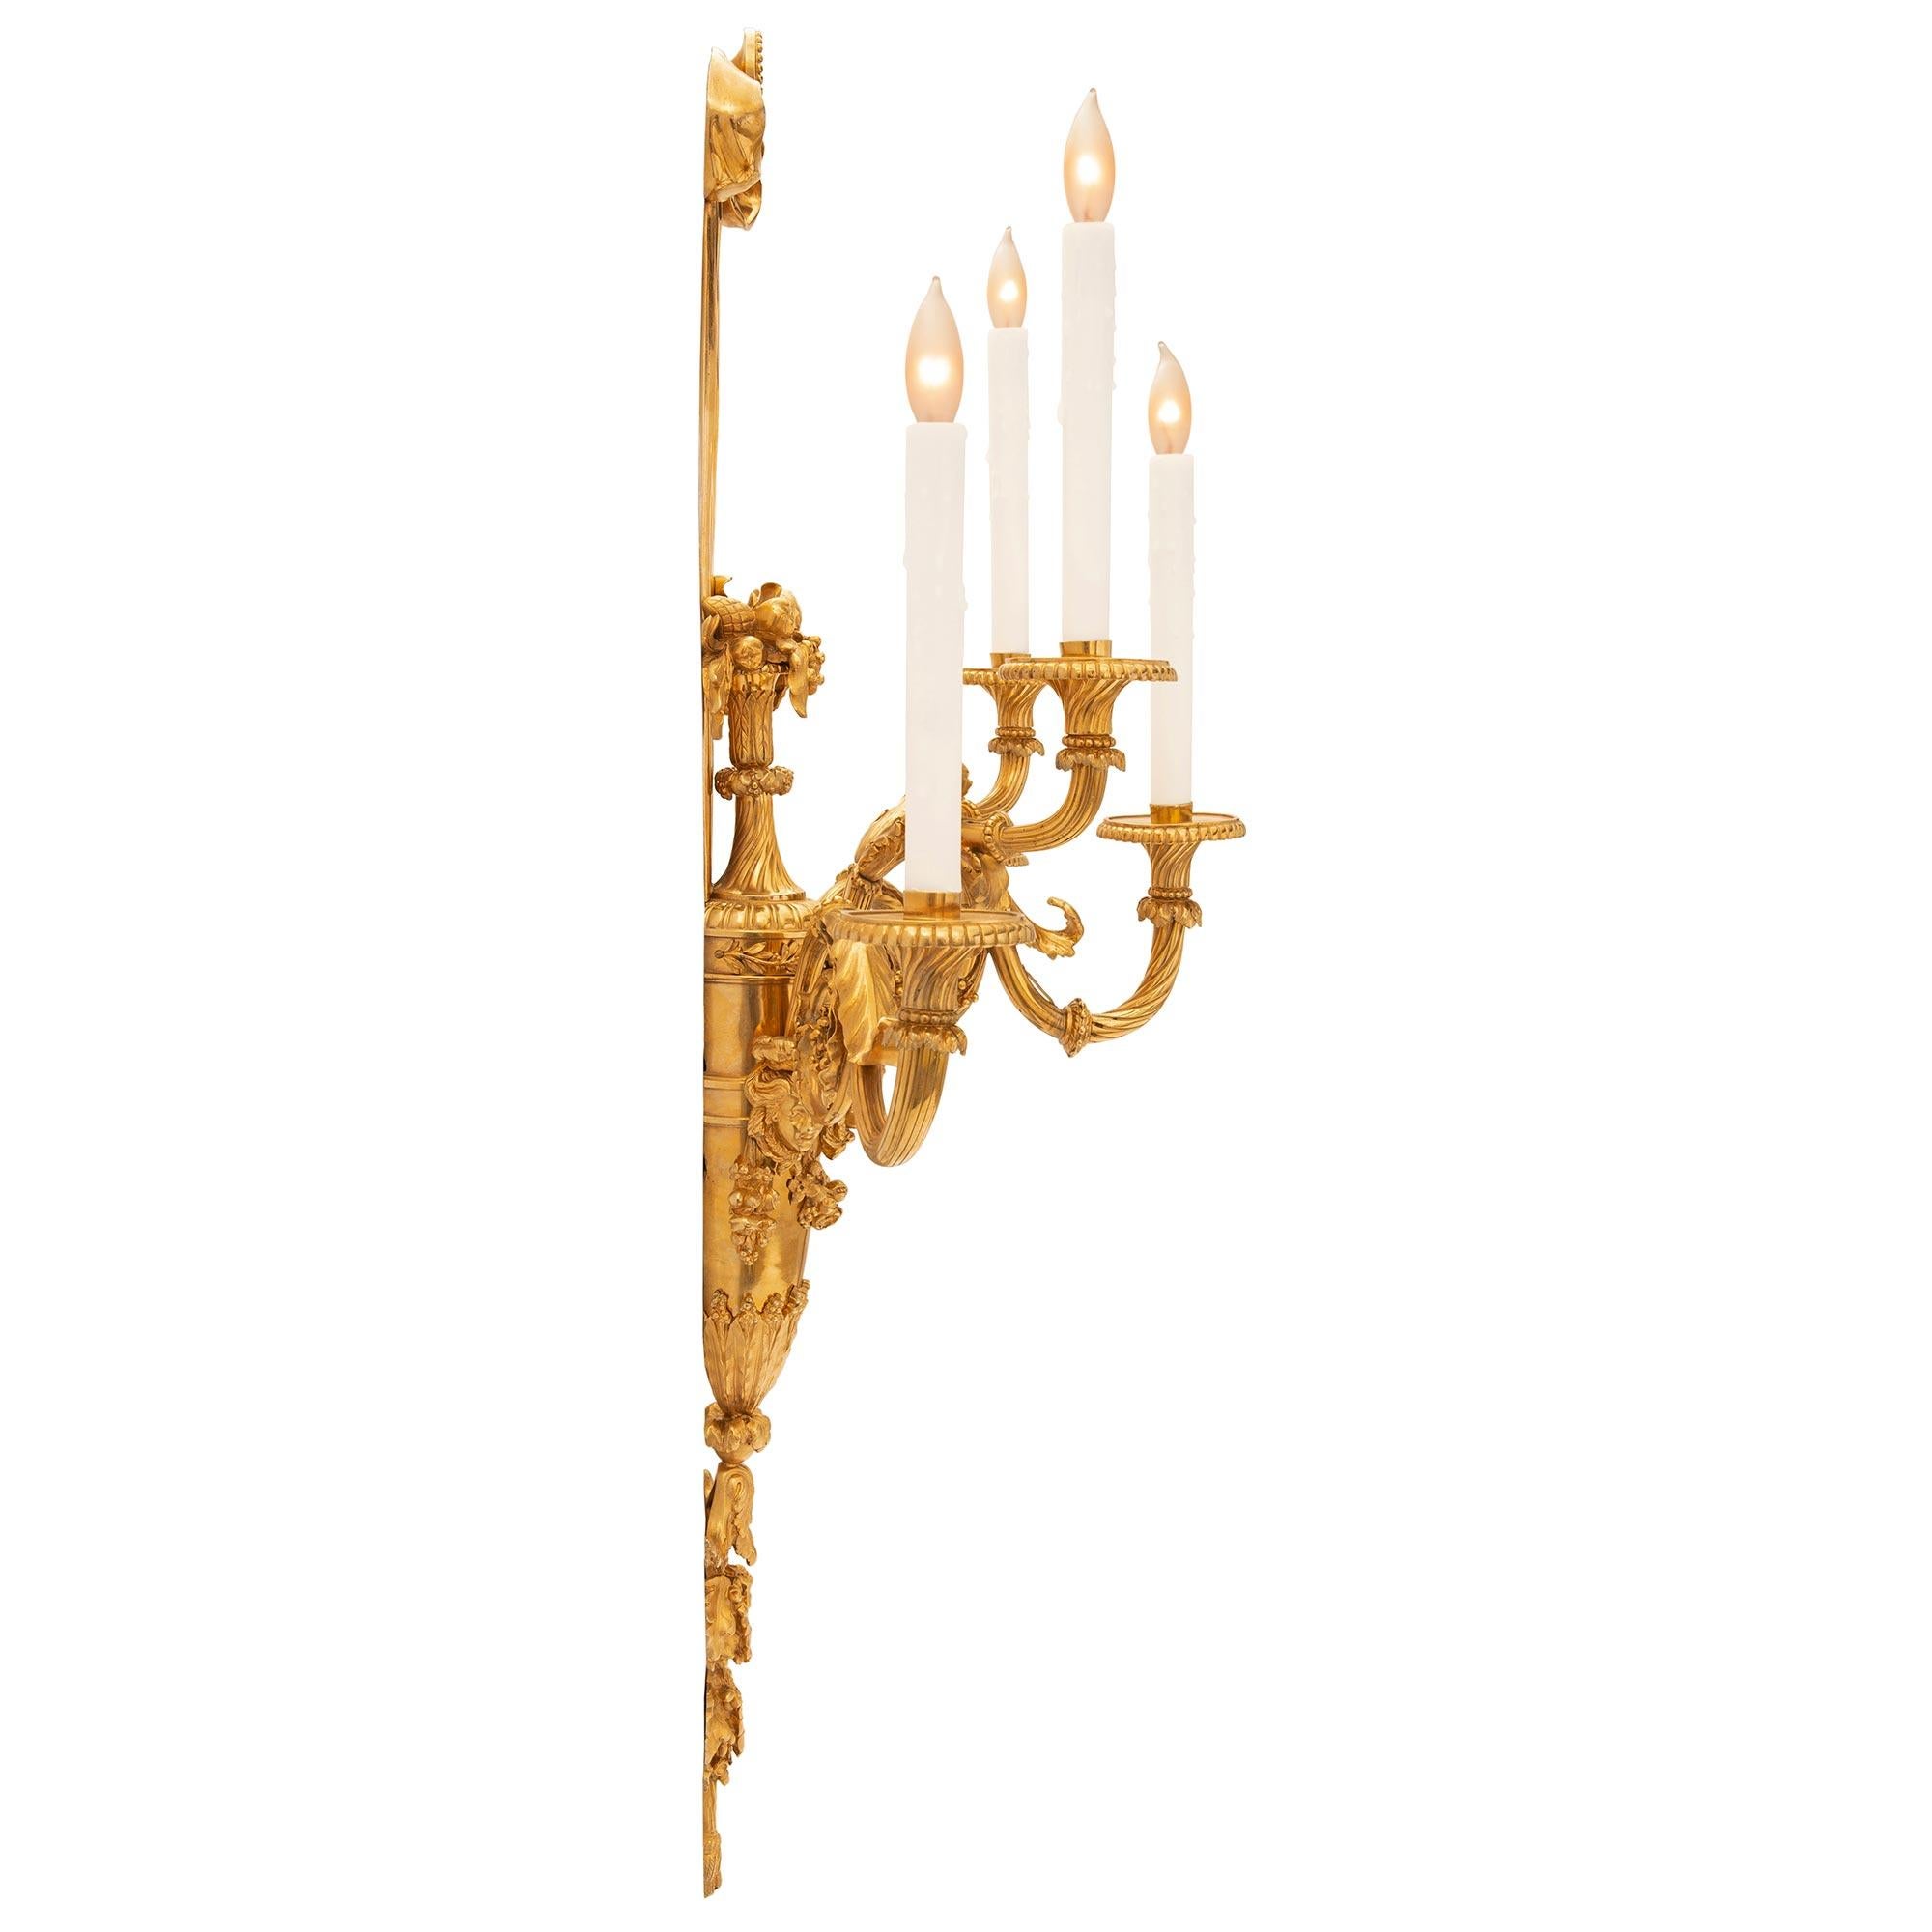 Pair of French Mid-19th Century Louis XVI St. Ormolu Sconces In Good Condition For Sale In West Palm Beach, FL